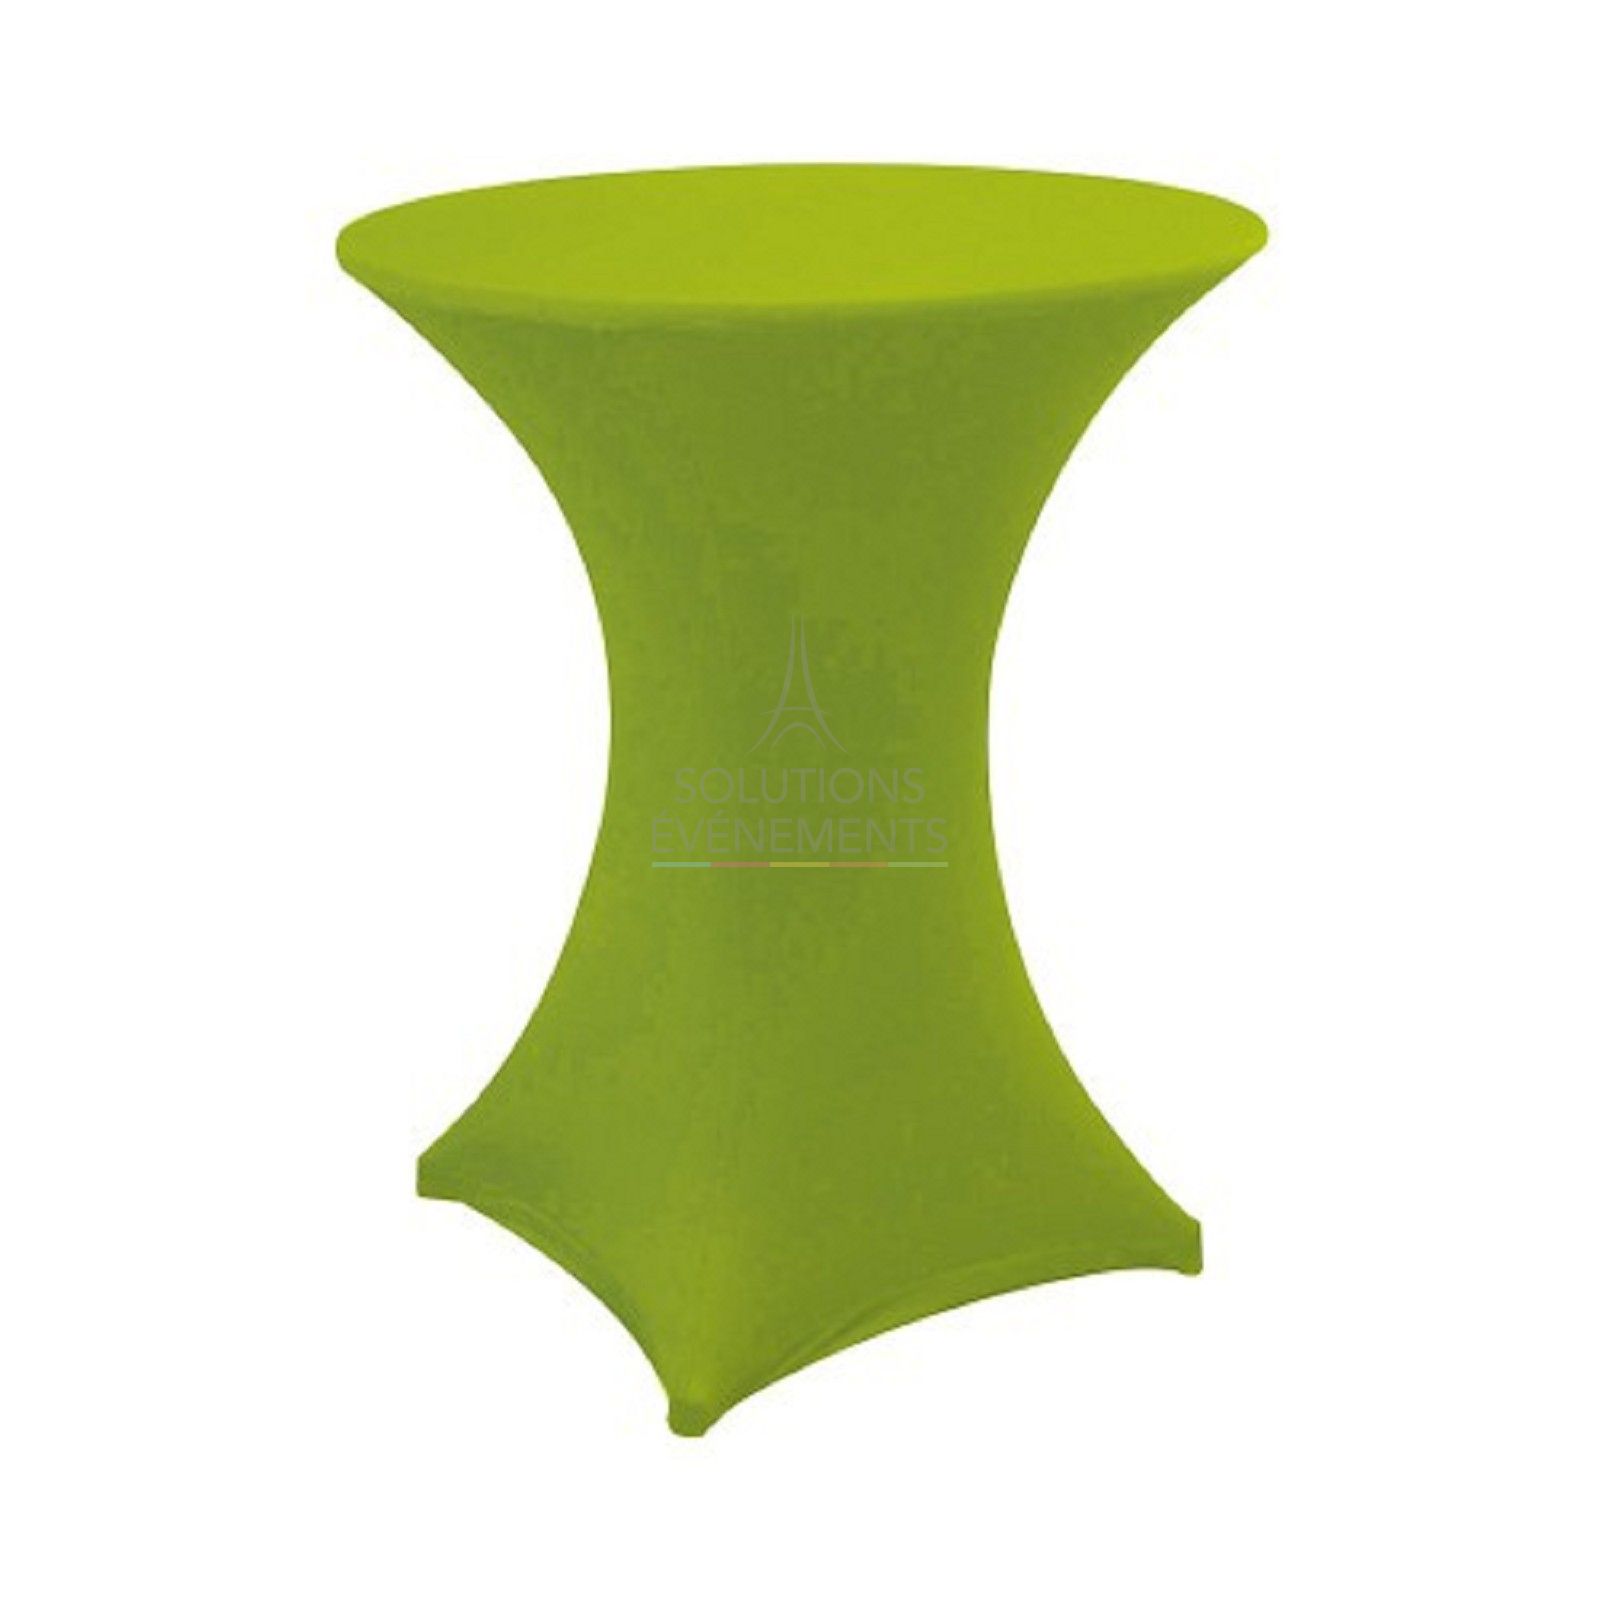 Rental of high standing dining table. Green